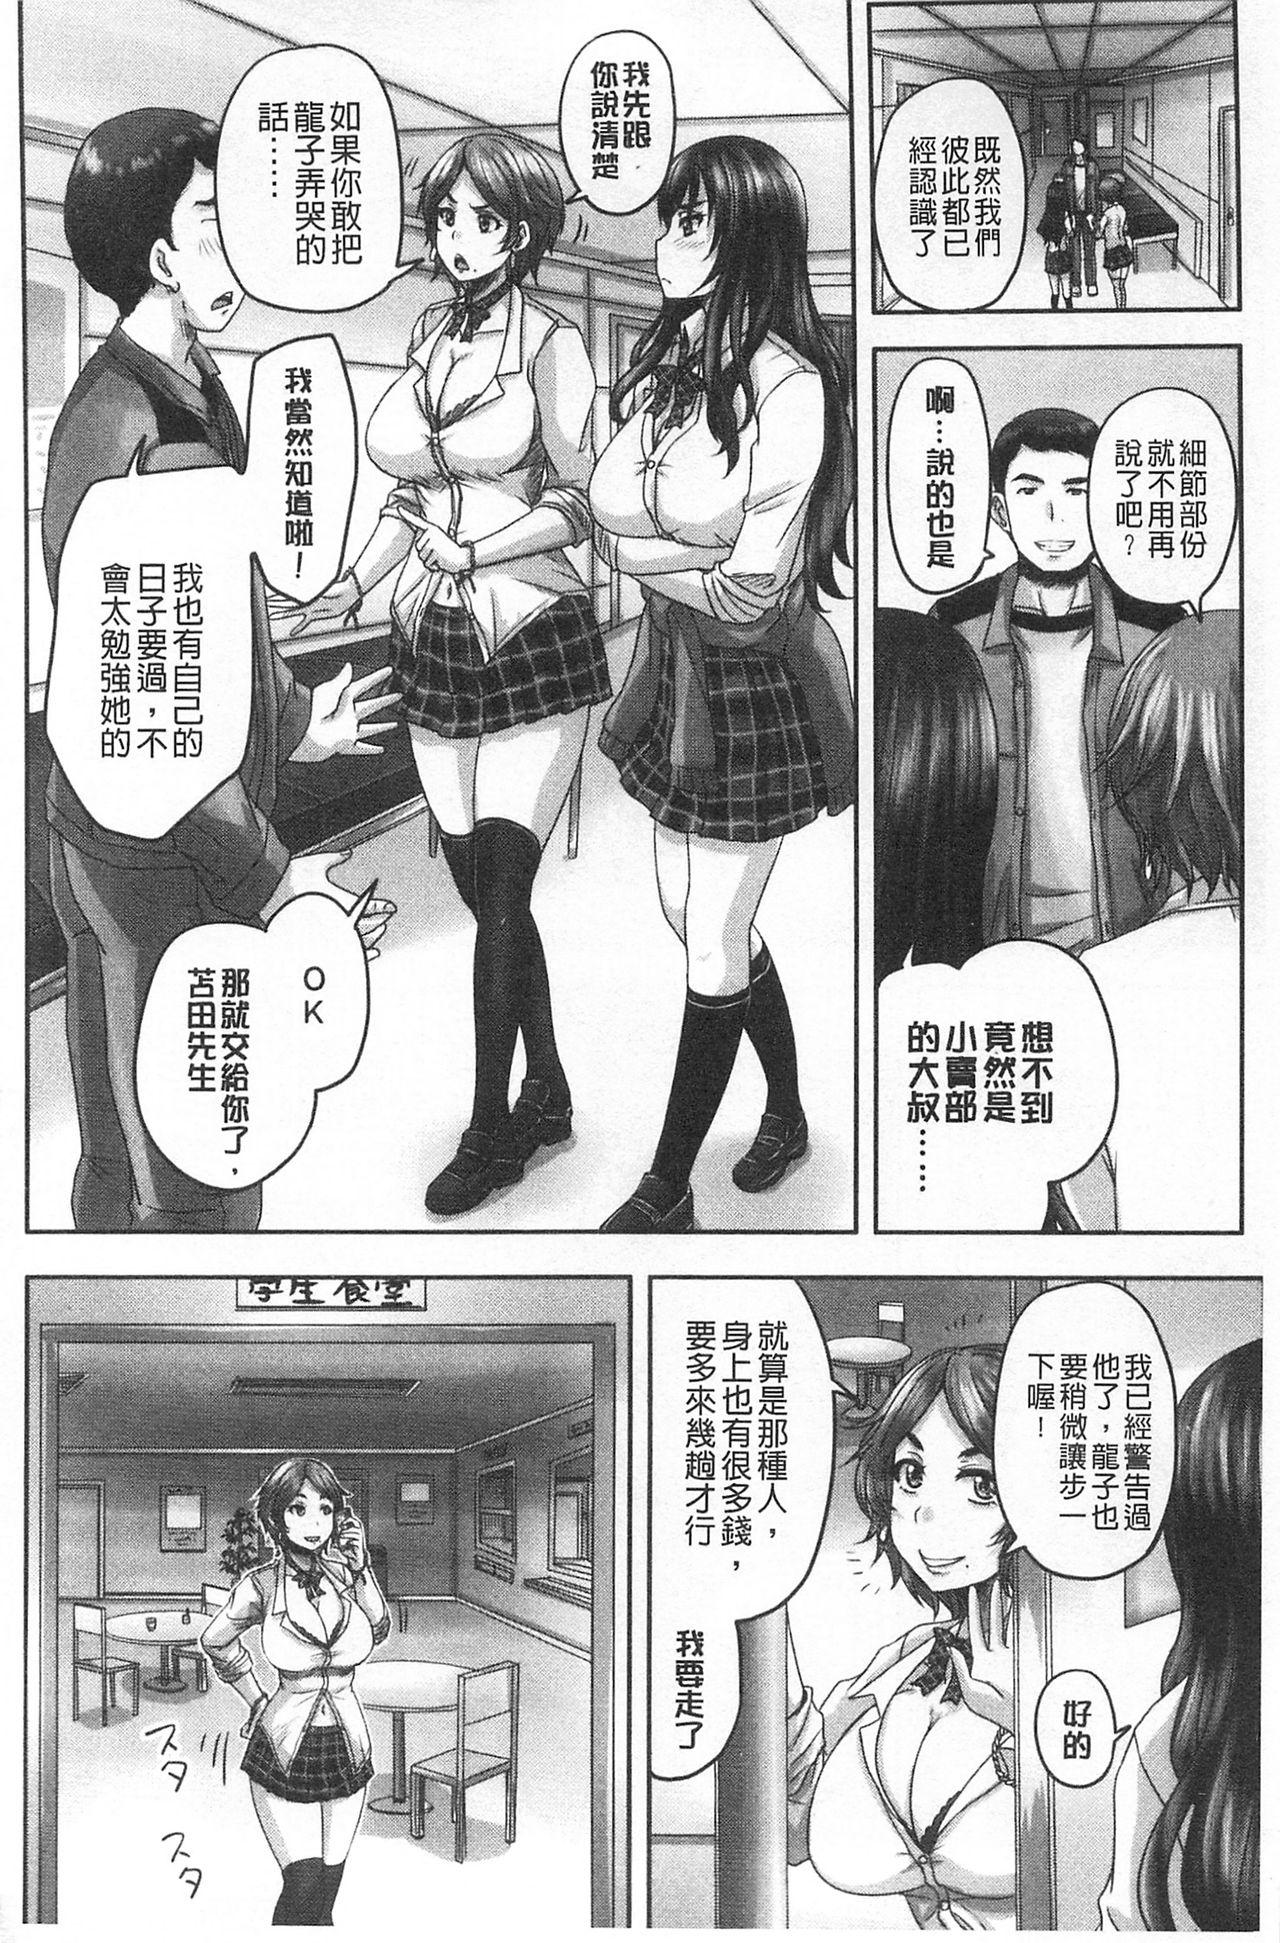 Screaming HARAMASEX!! | 受孕的性愛!! Bed - Page 7